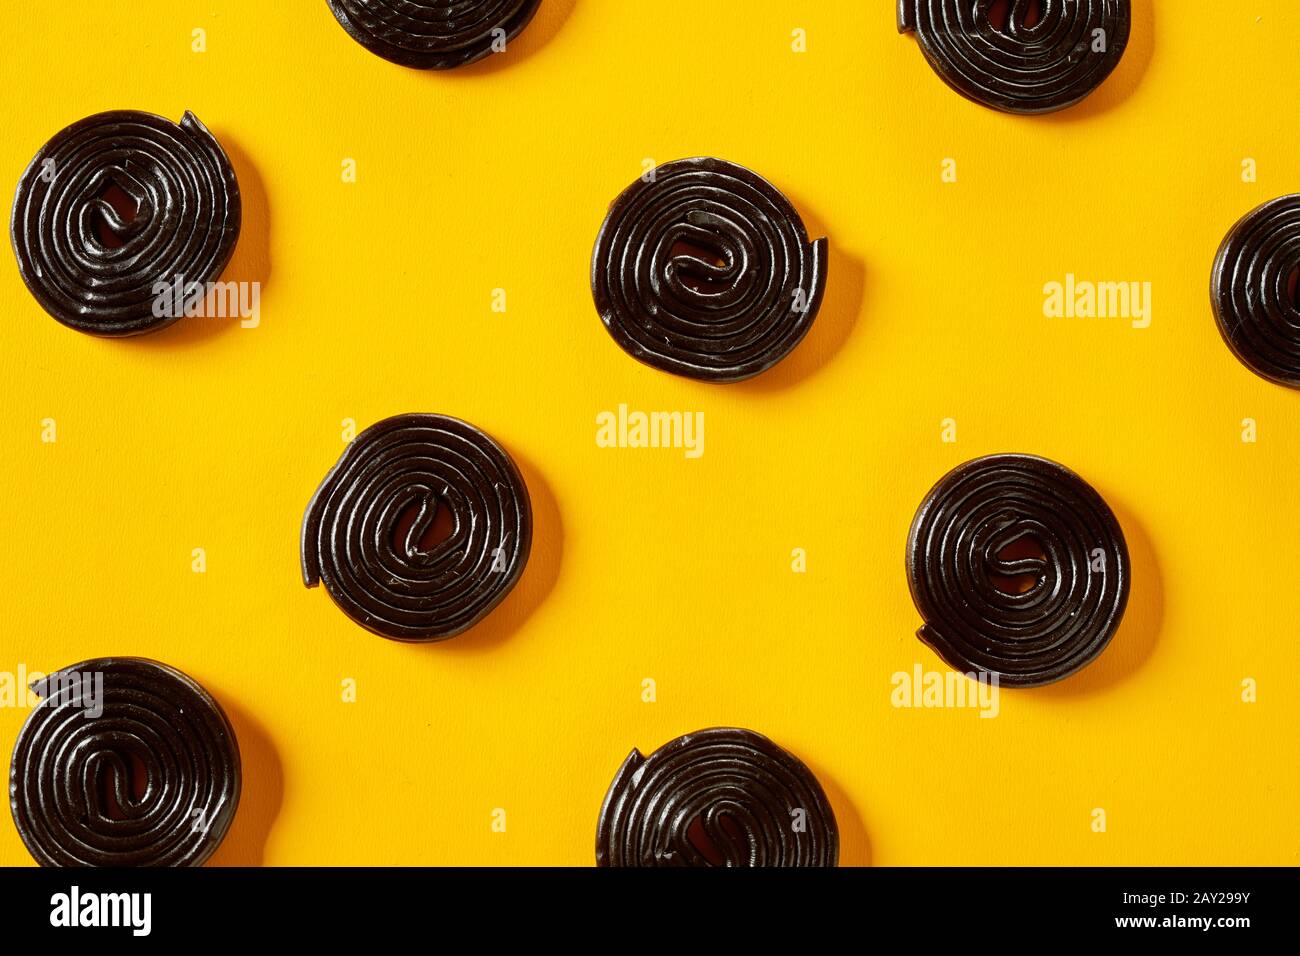 Liquorice coils on a bright yellow background arranged in diagonal rows in a full frame view Stock Photo